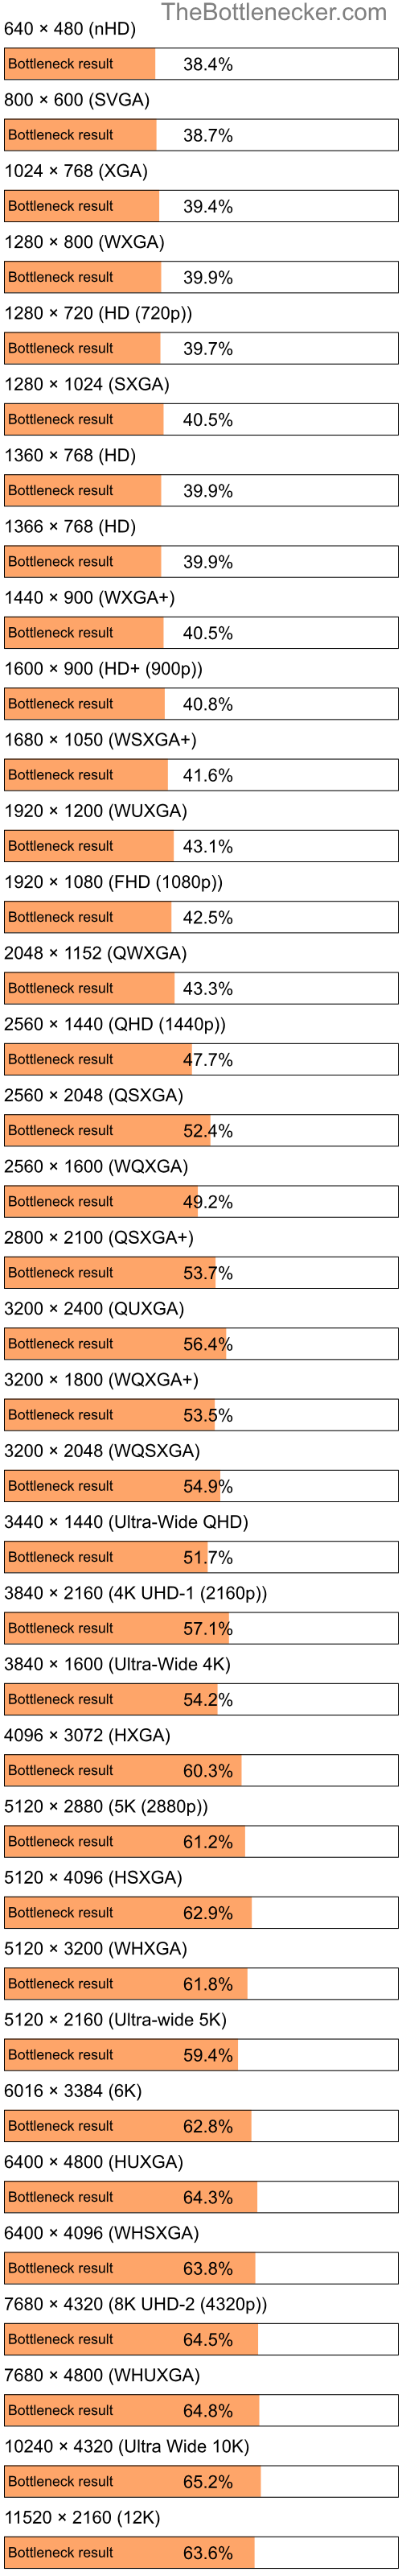 Bottleneck results by resolution for Intel Core i7-13700KF and NVIDIA GeForce GTX 1650 in Graphic Card Intense Tasks